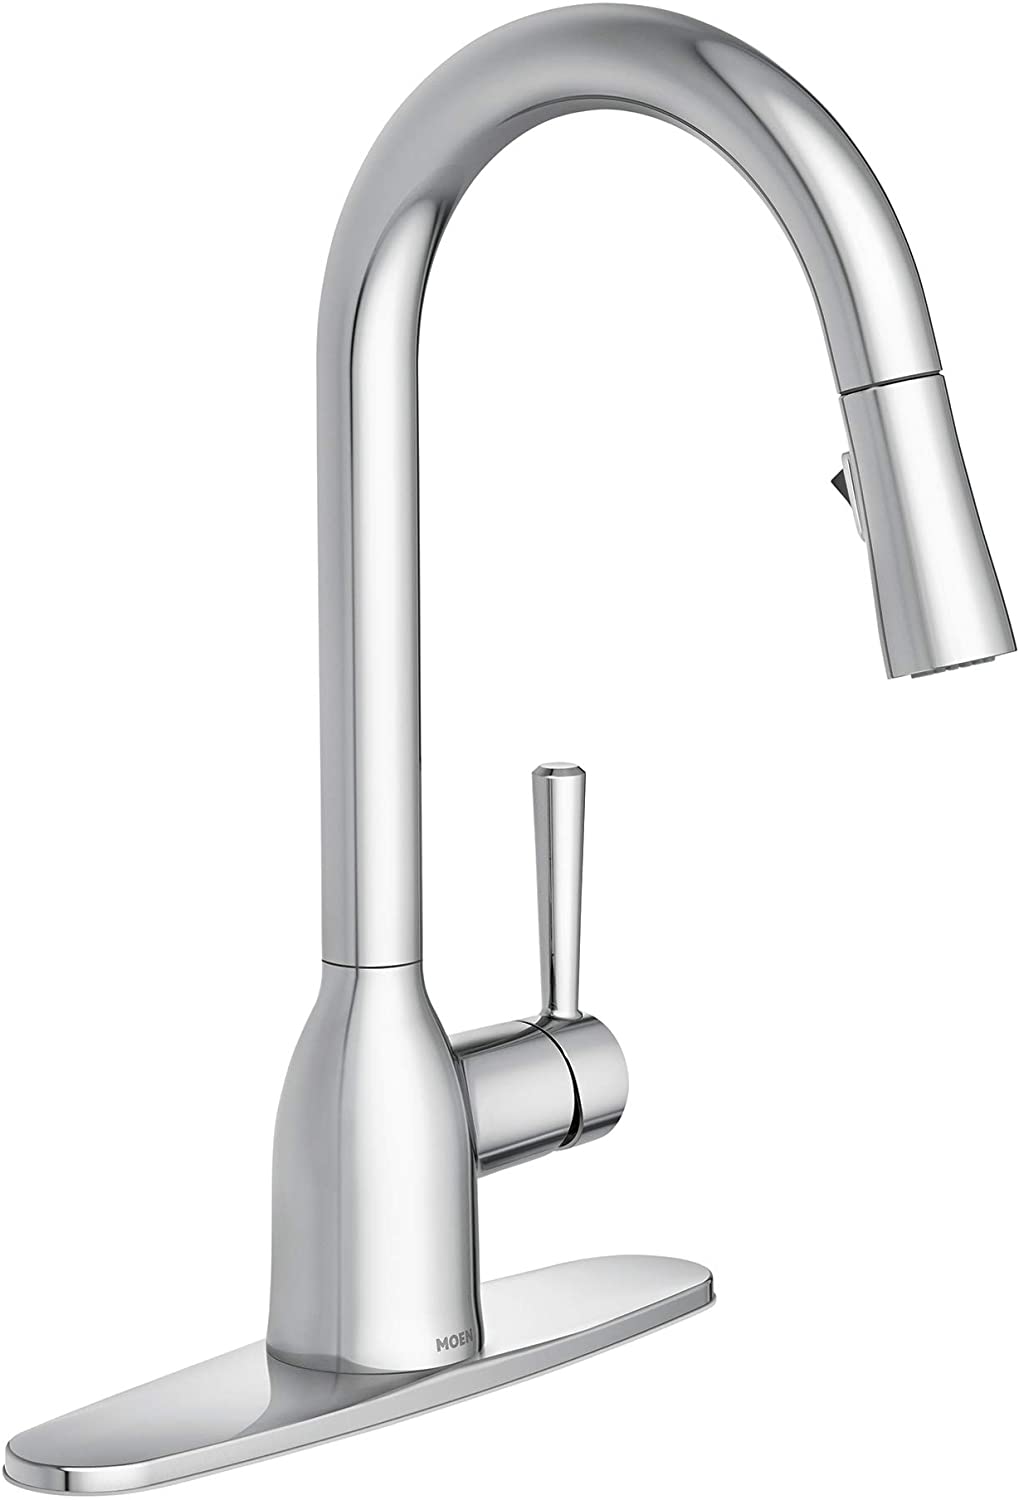 Moen Adler One-Handle High Arc Pulldown Kitchen Sink Faucet w/ Power Clean & Pull Down Sprayer (Chrome) $99.67 + Free Shipping